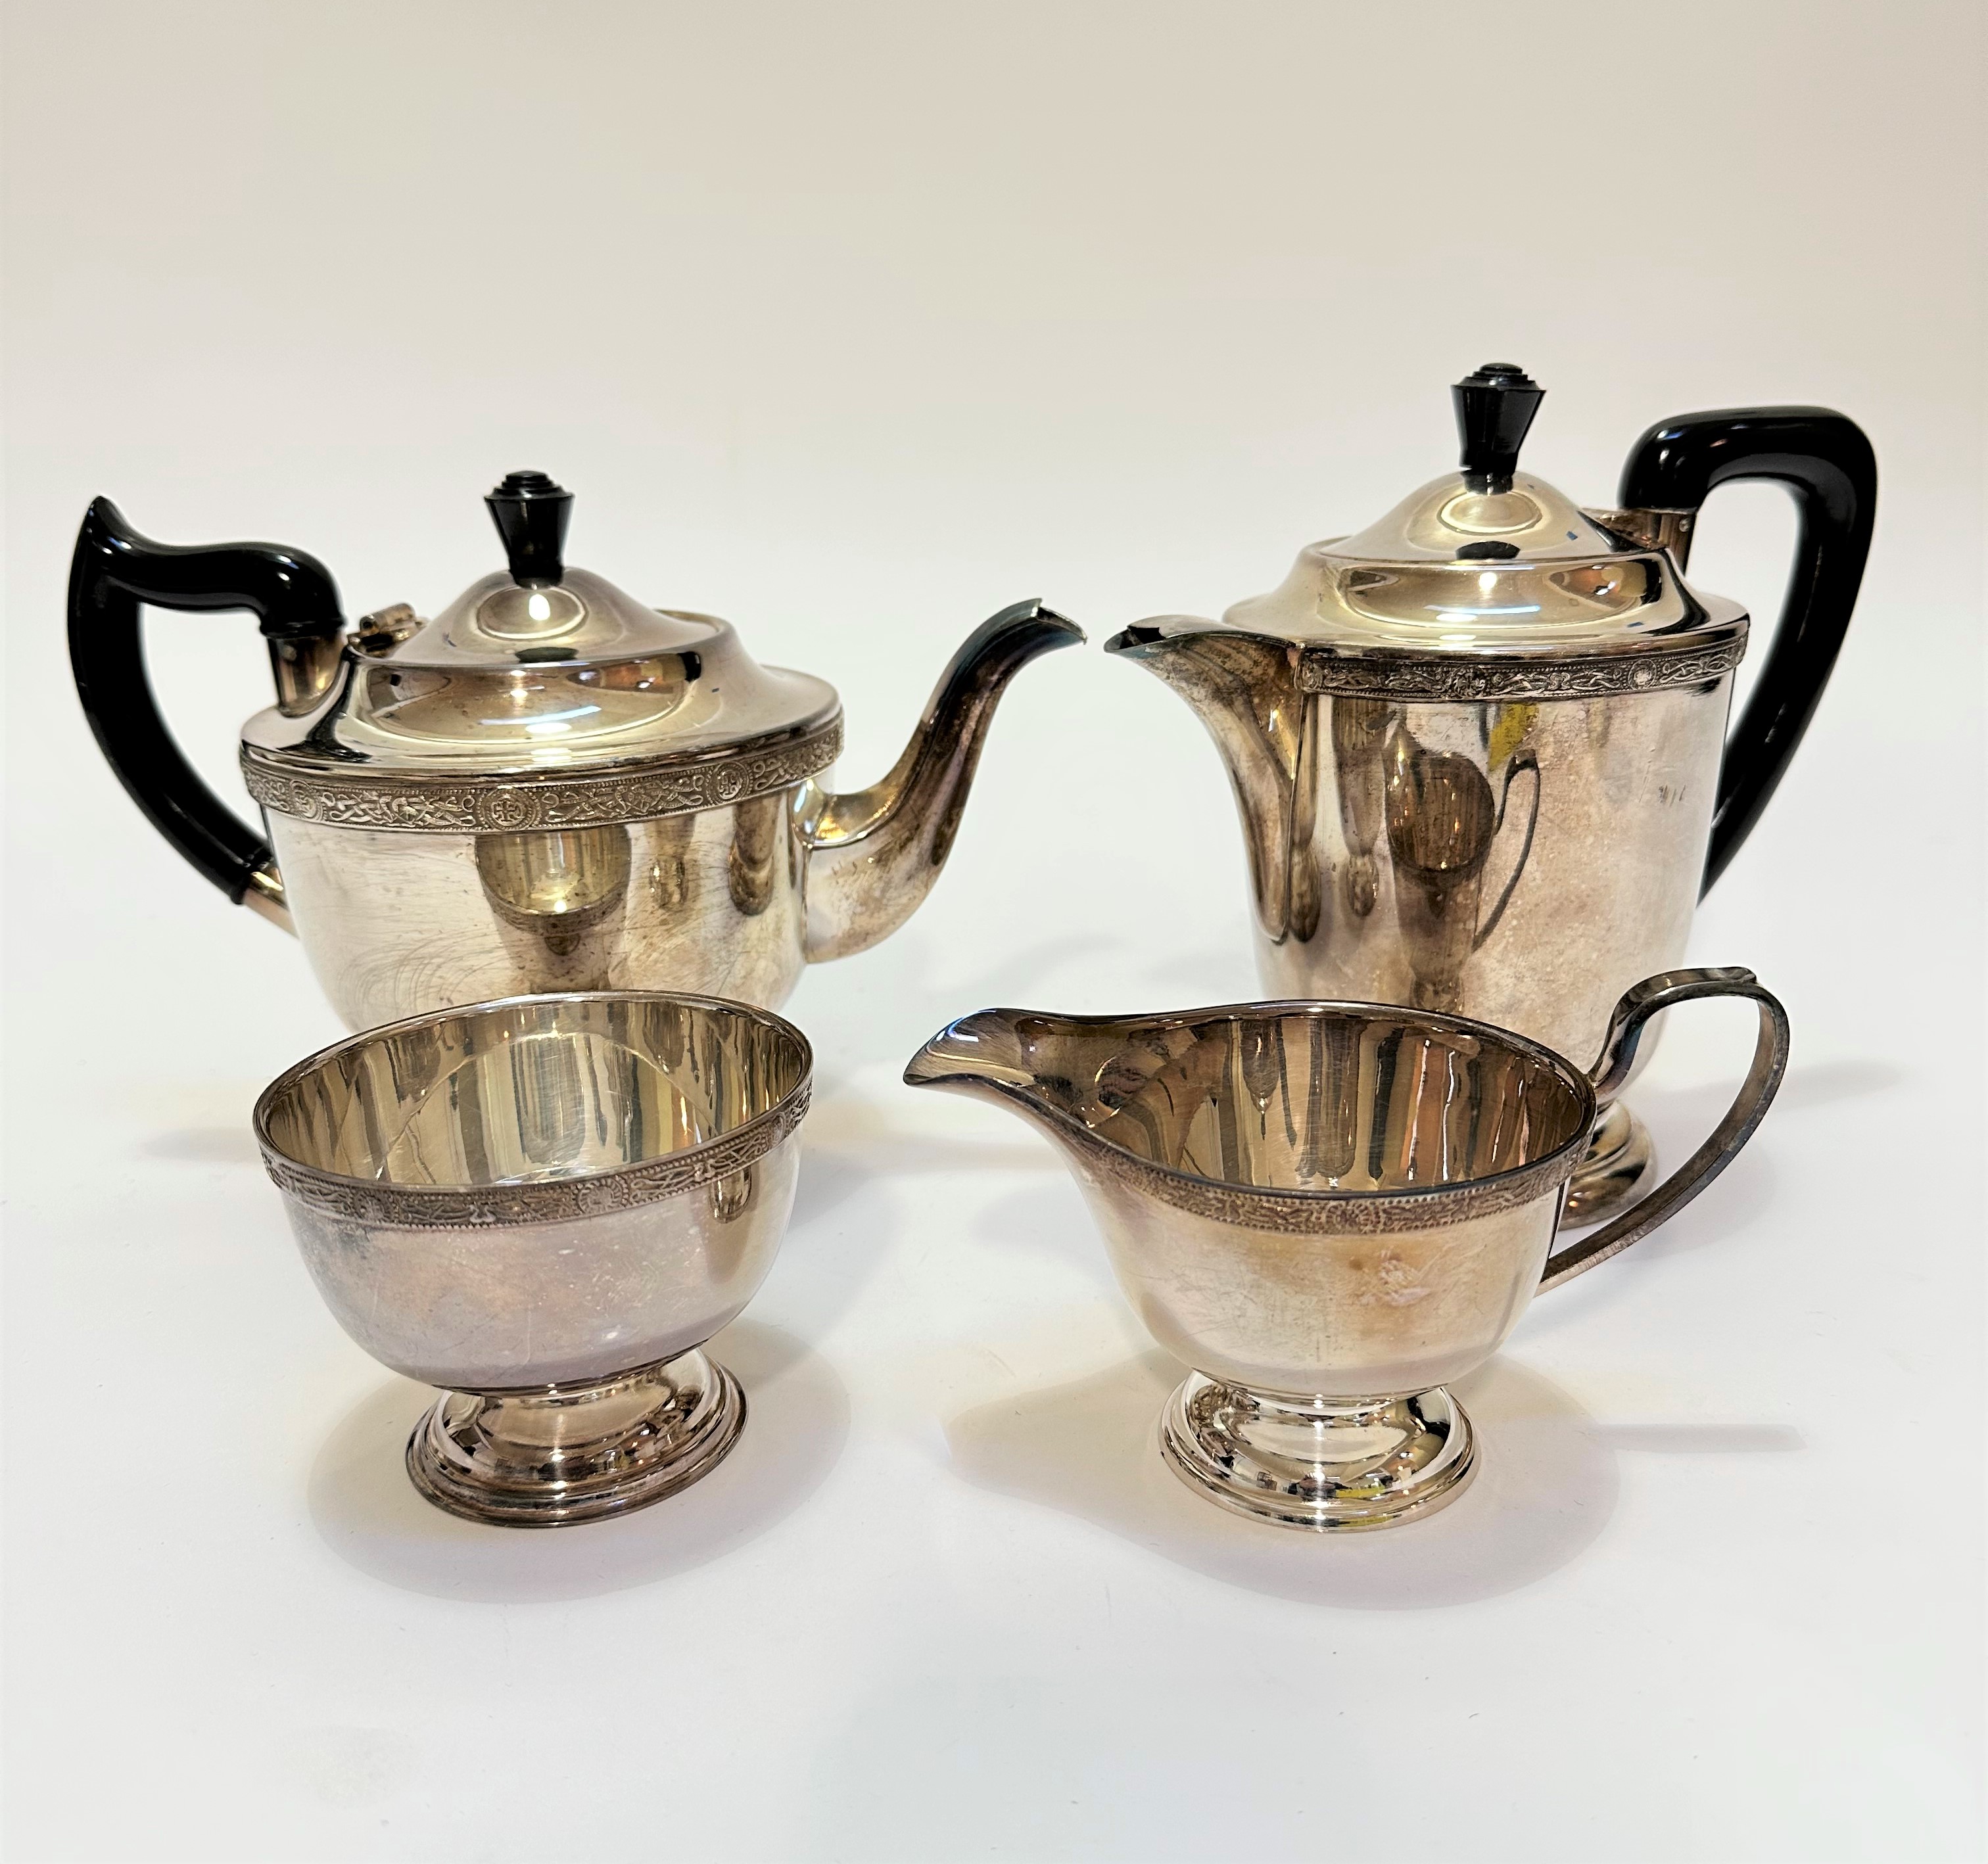 A four piece Epns tea and coffee service with Celtic style knot border and black bakelite knots